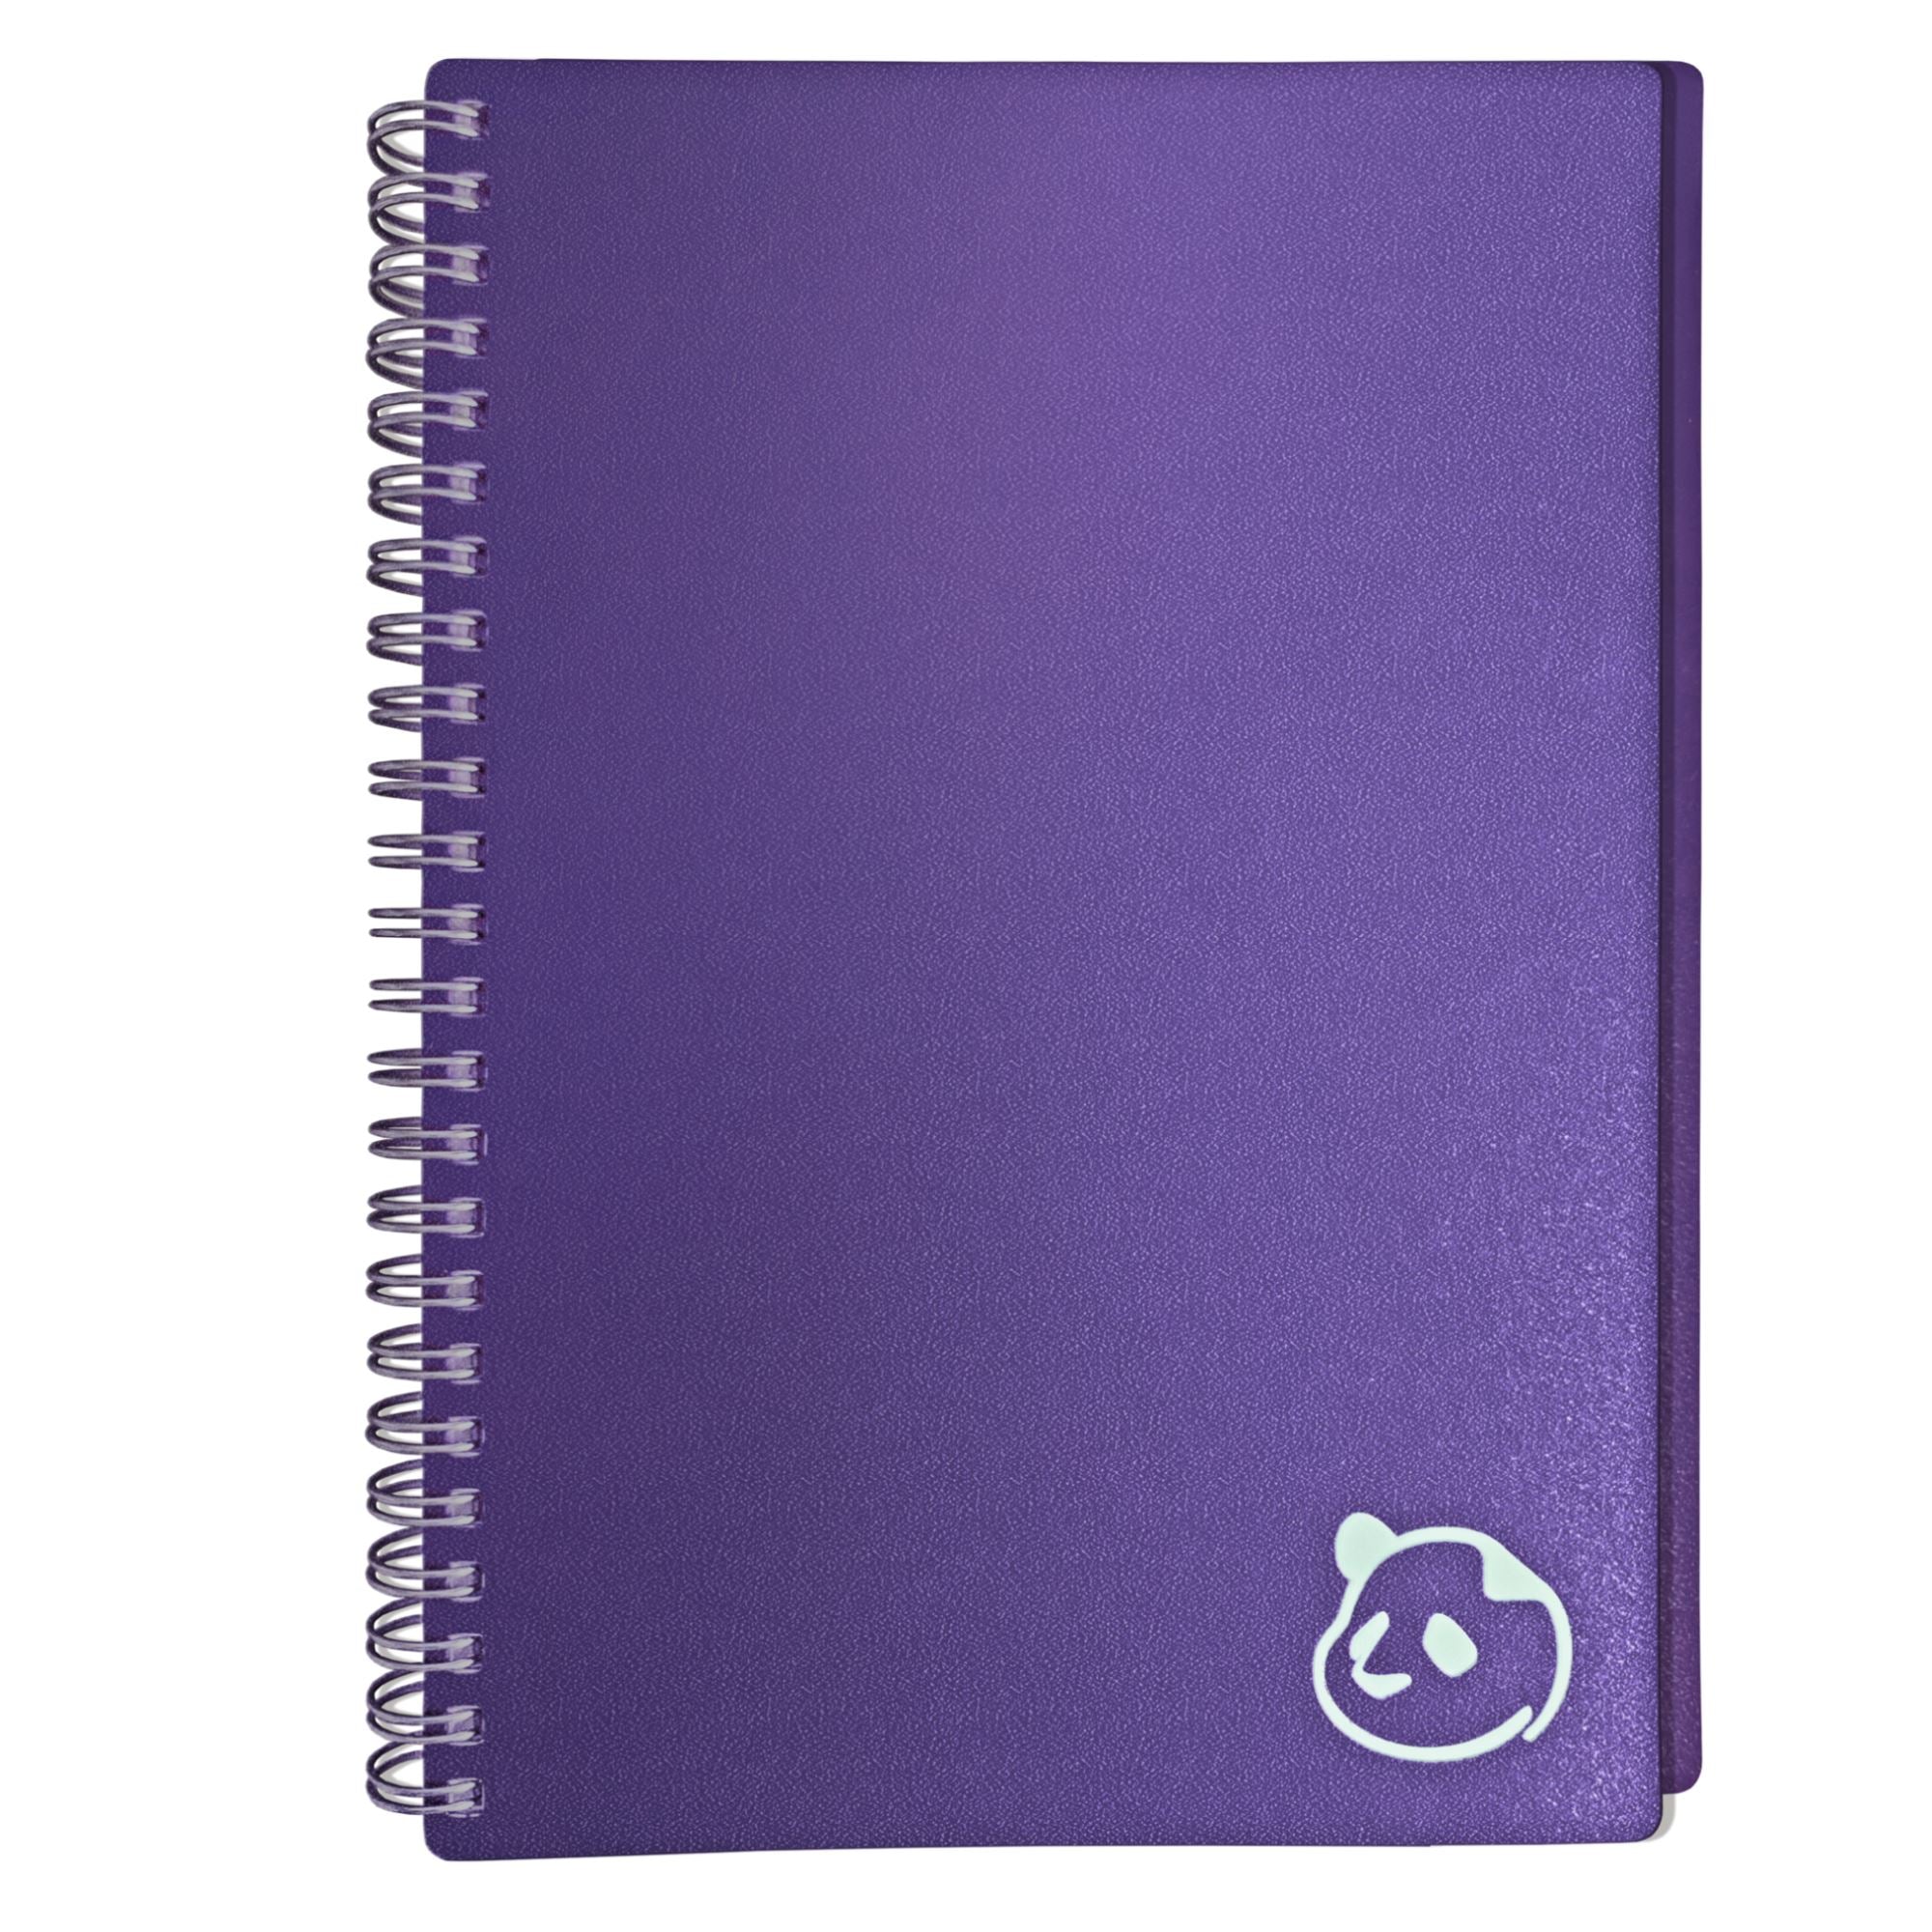 12 Month Weekly 2.0 – Monthly Calendar & Monday – Sunday Weekly Planning Weekly Planner 2.0 5.75" x 8.25" Undated Purple 